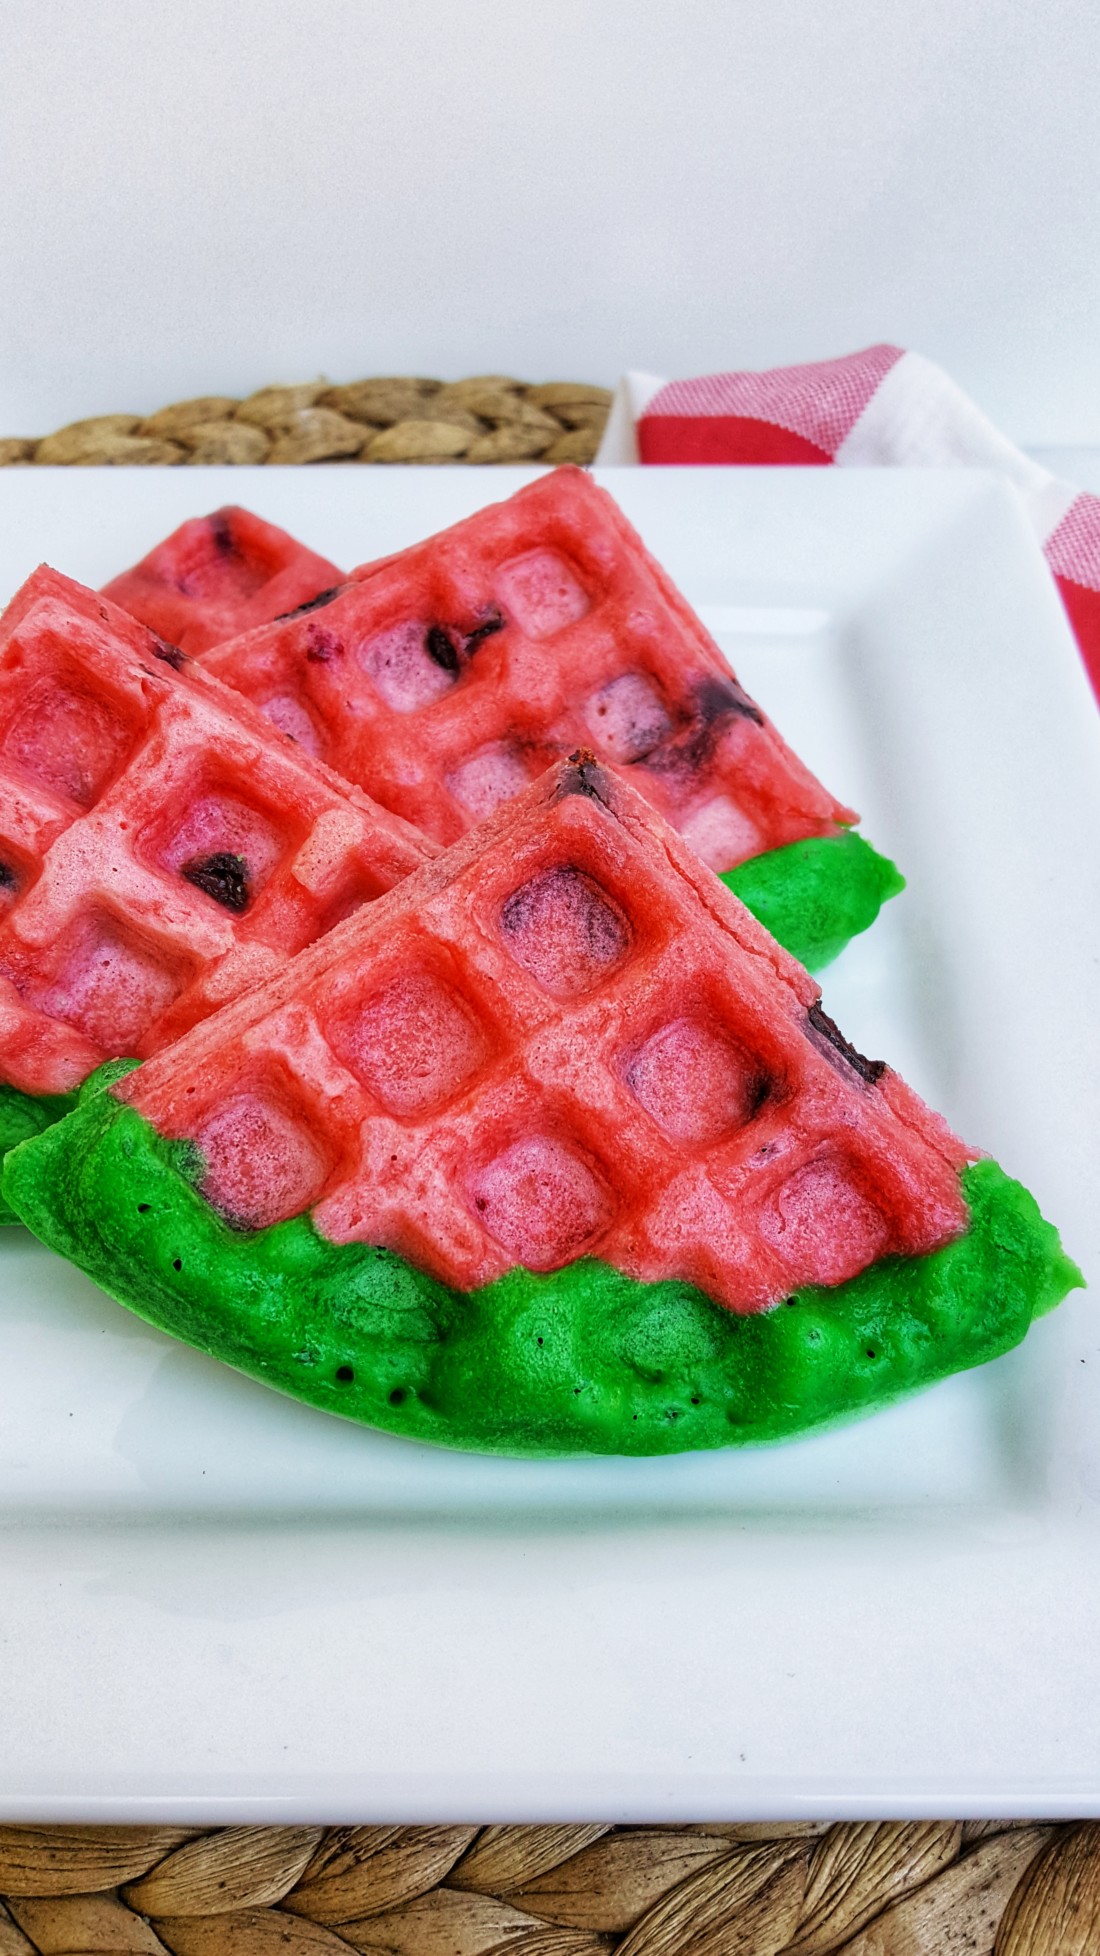 Watermelon Shaped Waffles – Chocolate Chip Waffles From Scratch